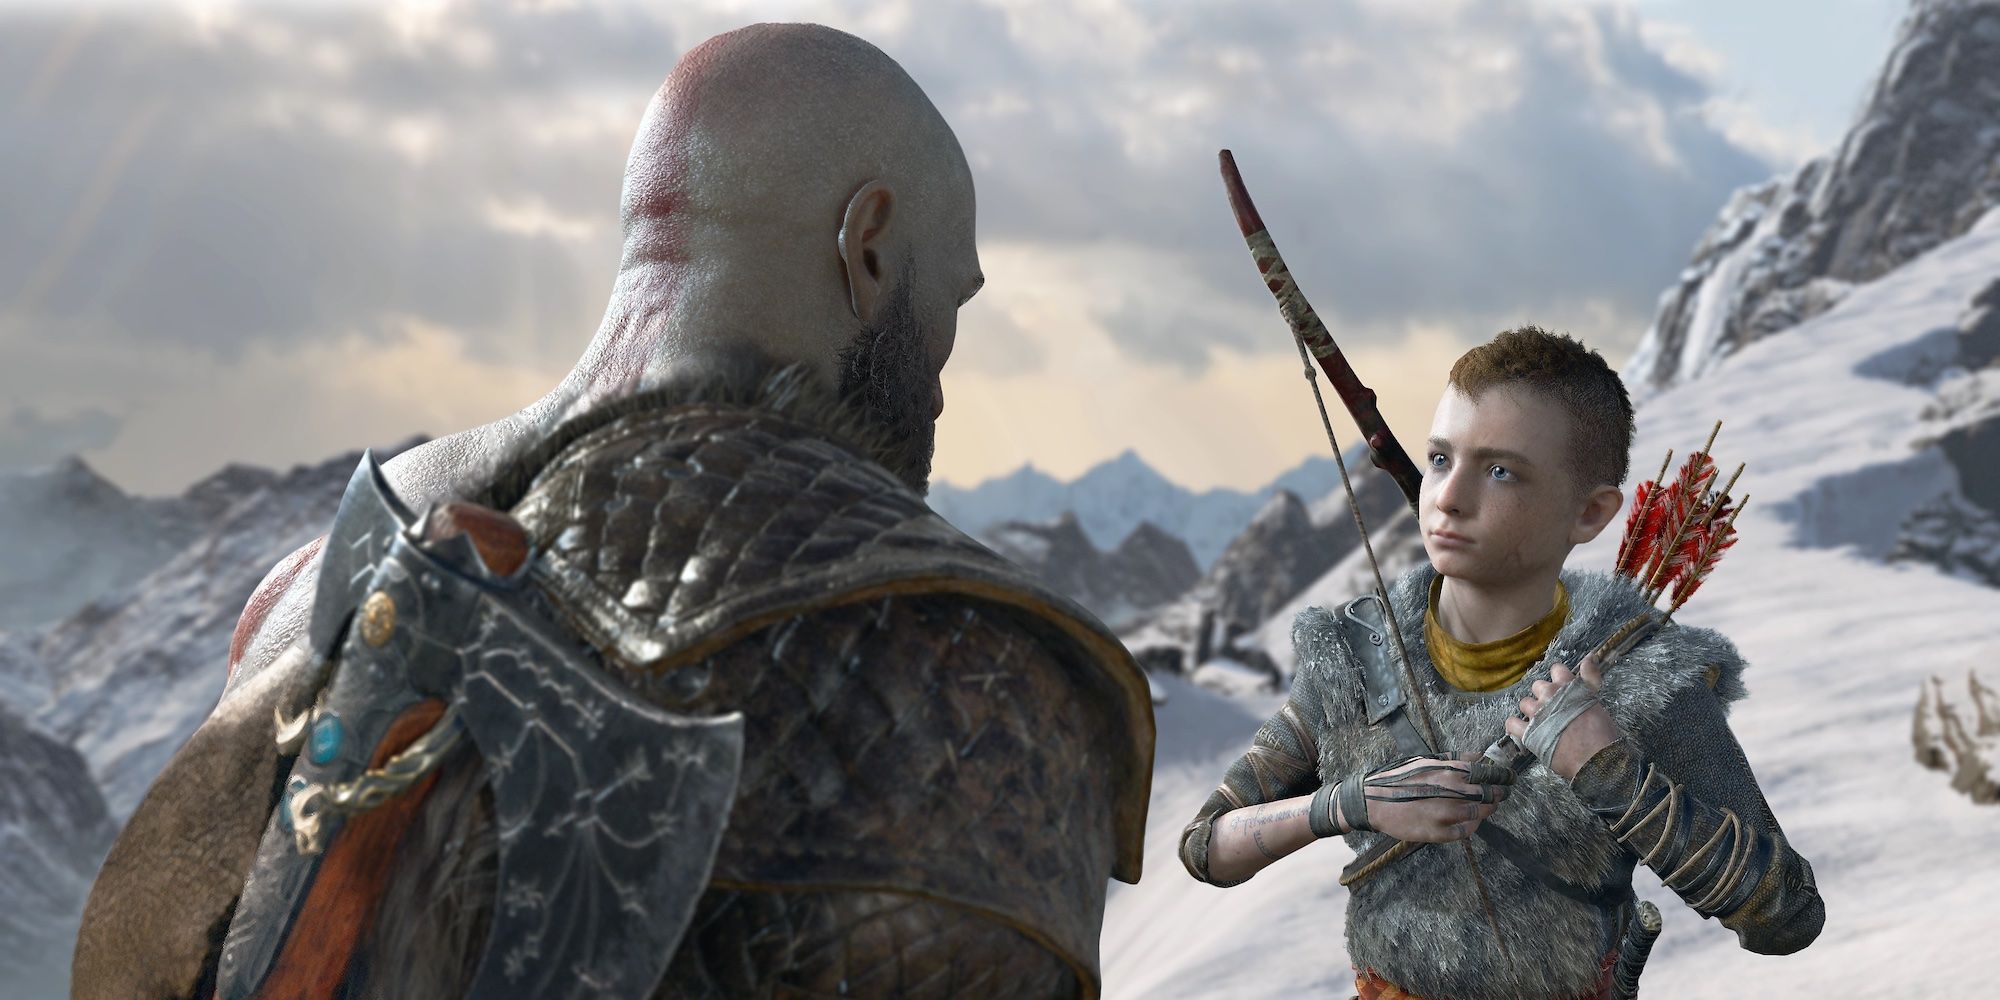 Kratos has killed many gods in the God of War series